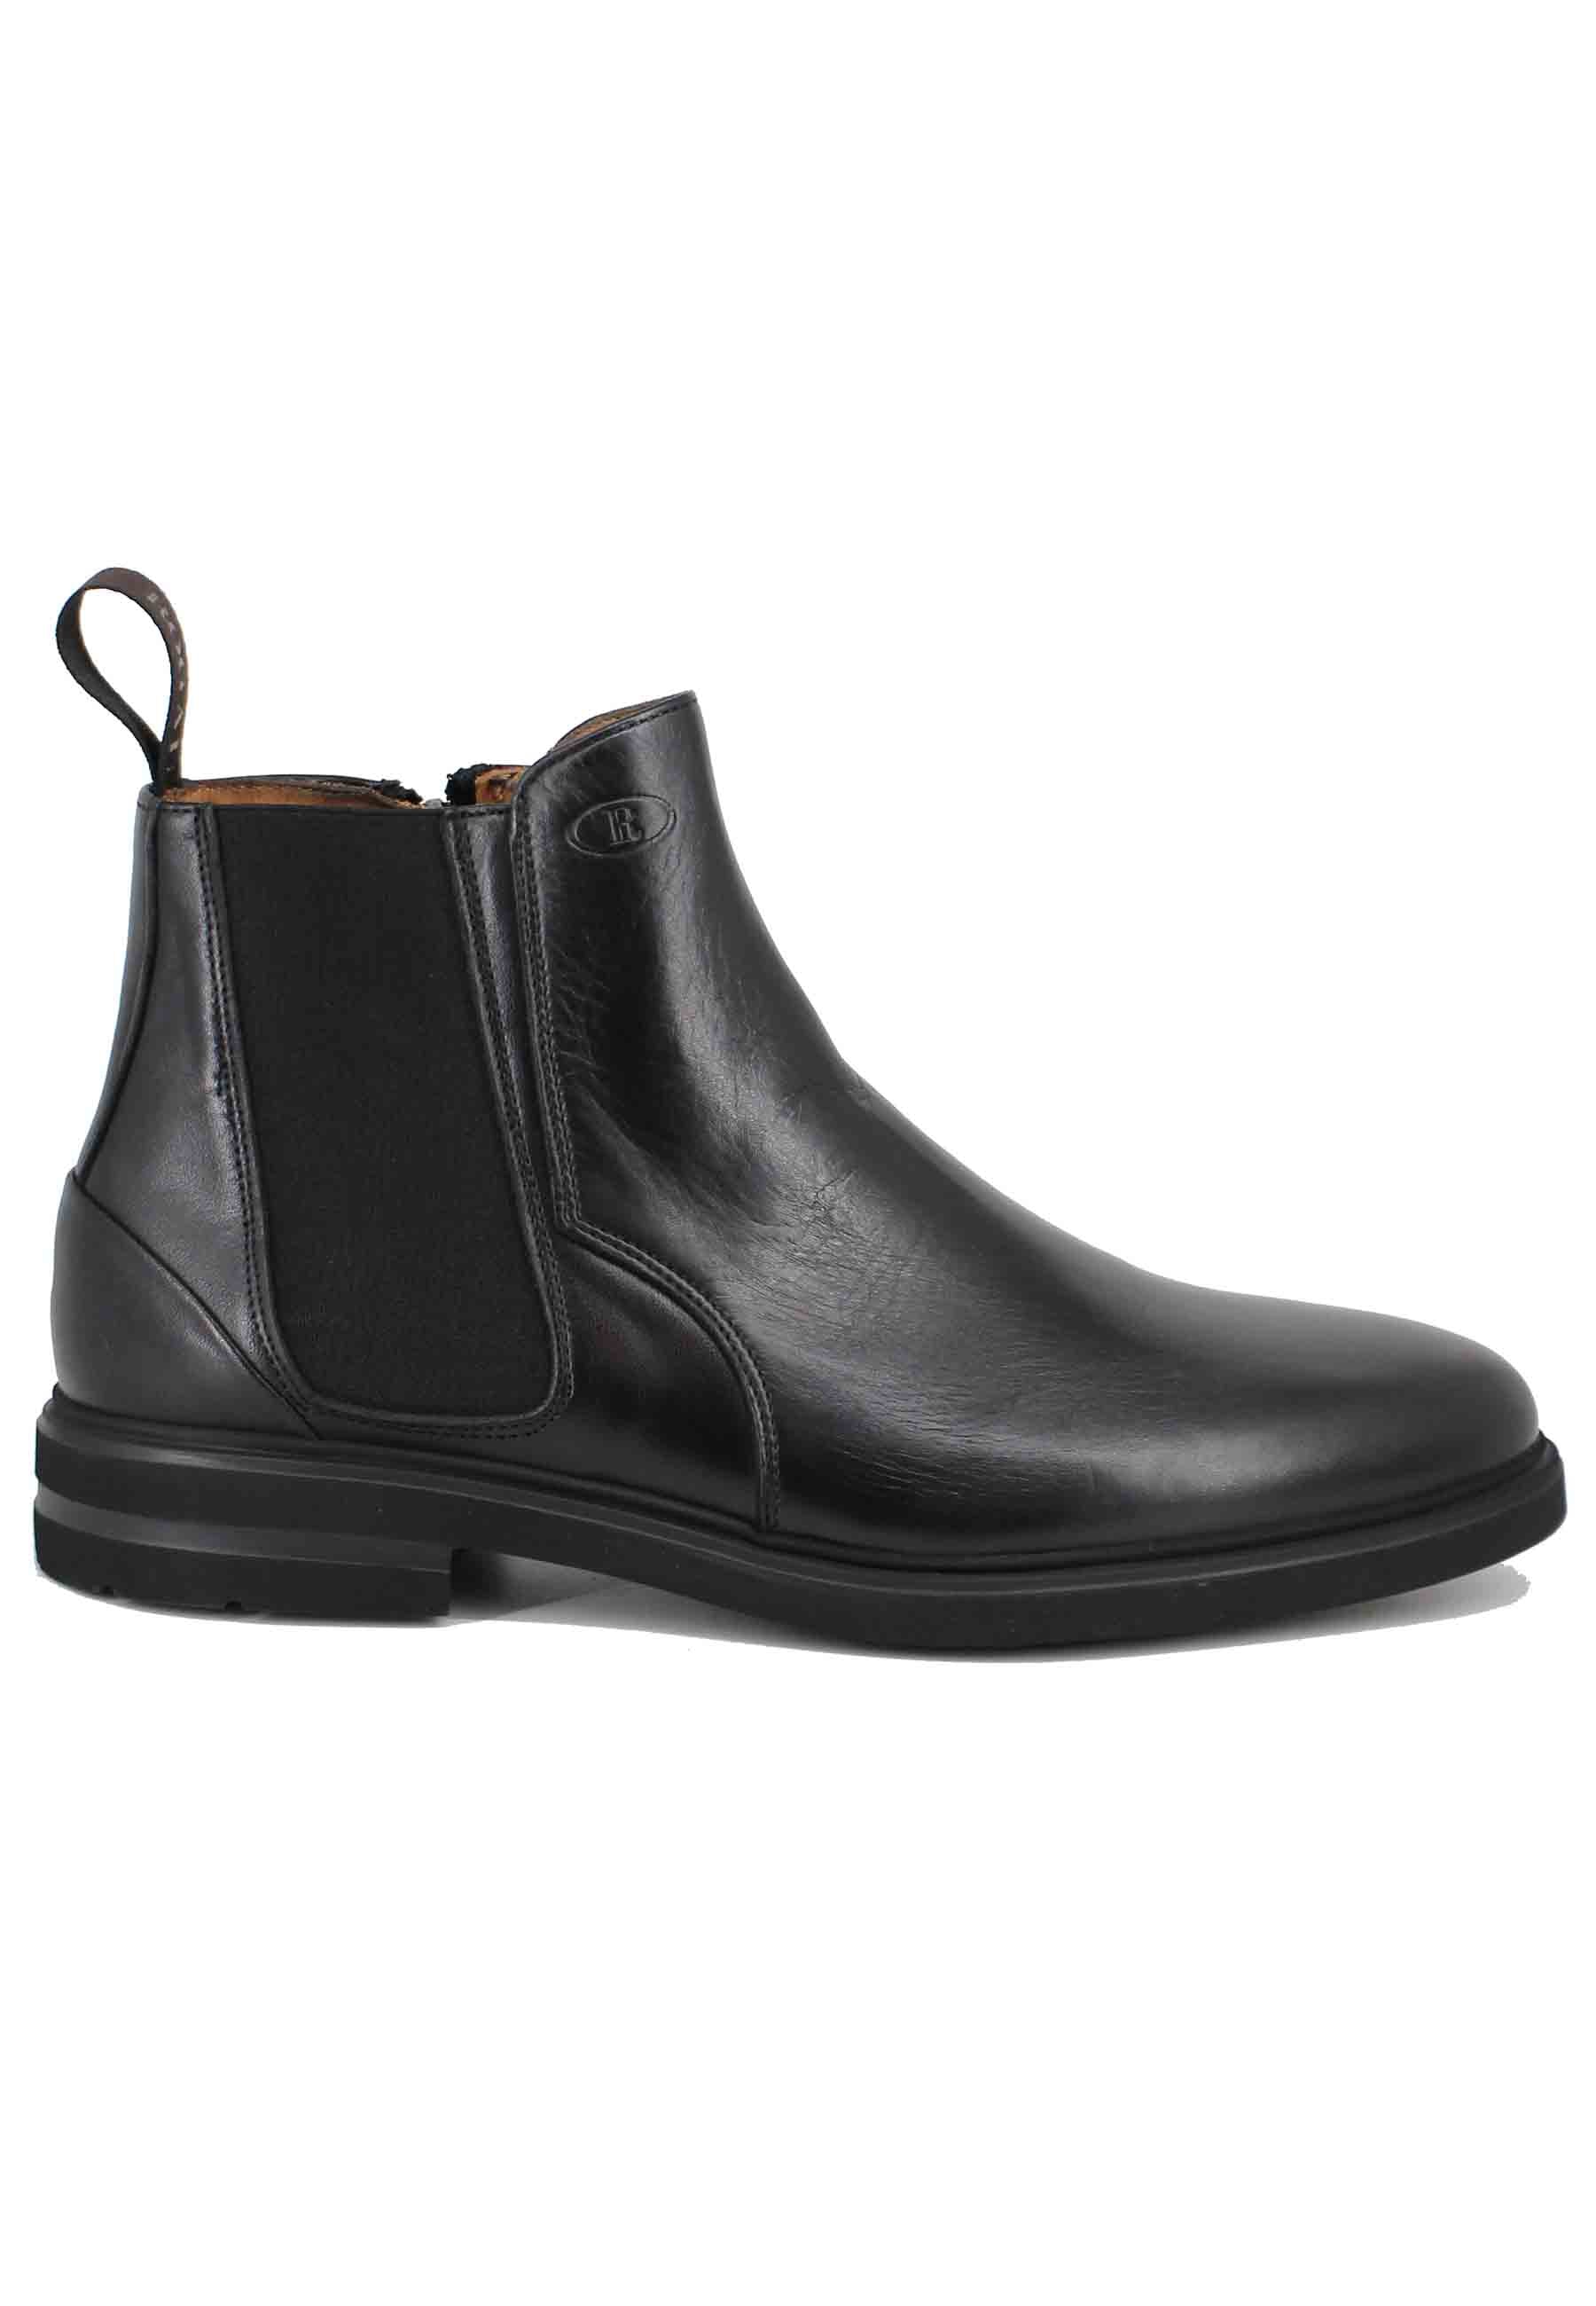 Men's ankle boots in black leather with rubber sole